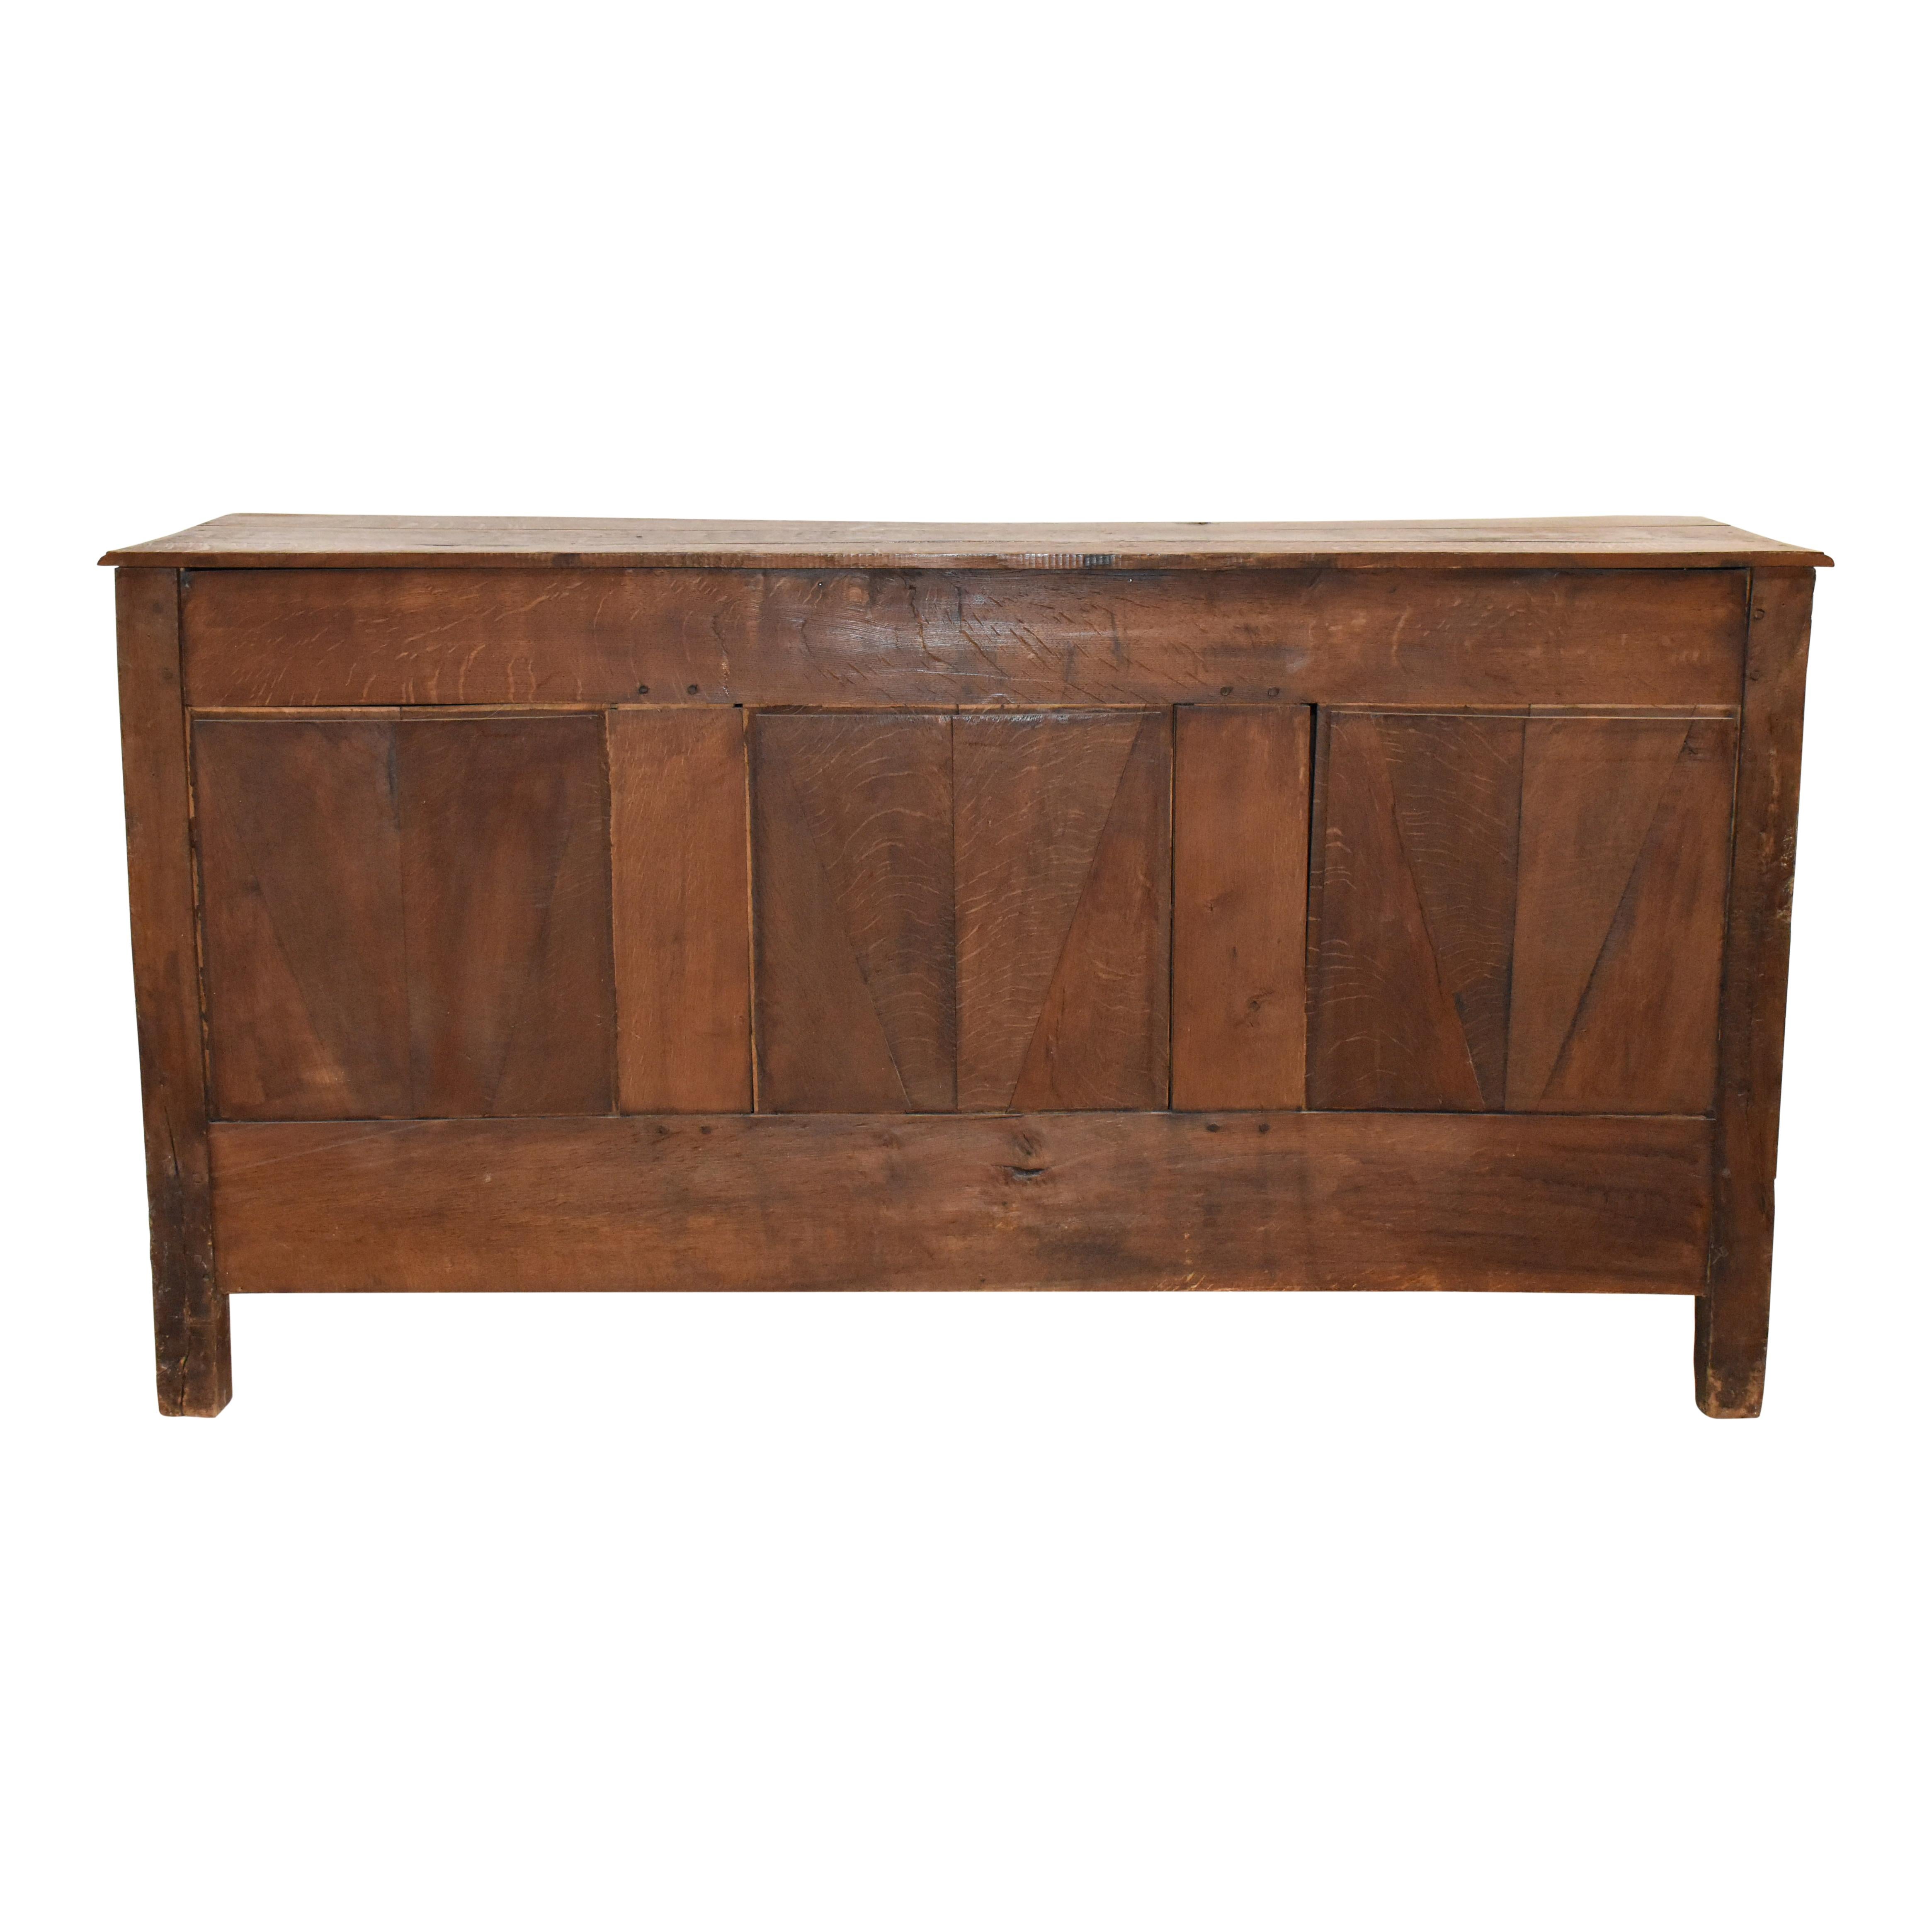 Rustic Oak Sideboard with Two Doors and Four Drawers, circa 1880 For Sale 2